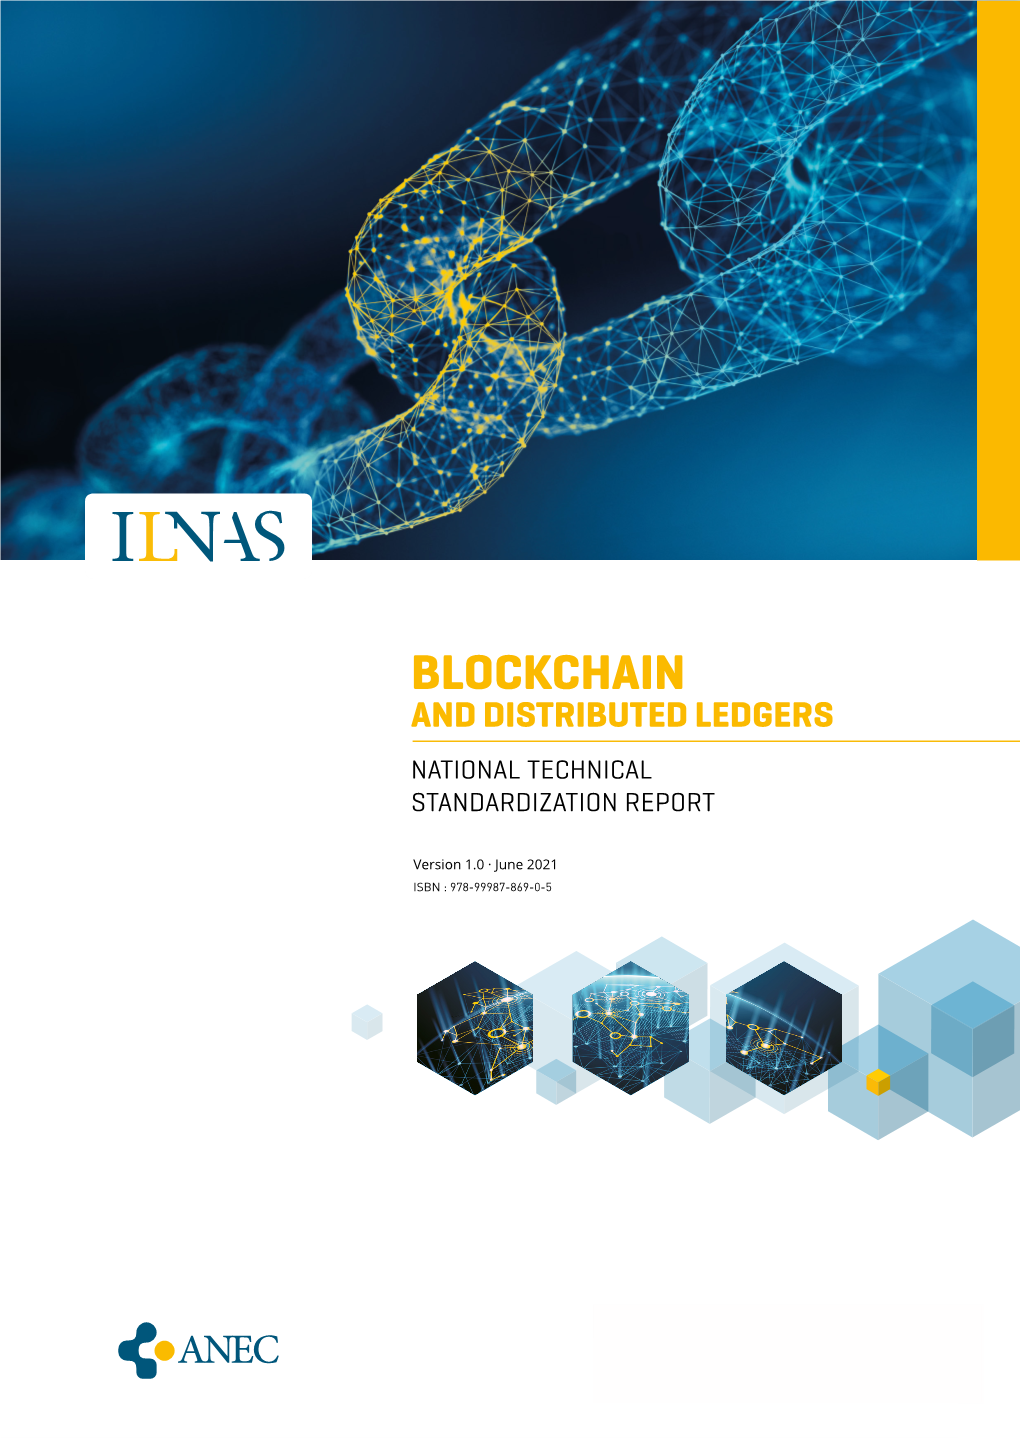 Blockchain and Distributed Ledgers National Technical Standardization Report